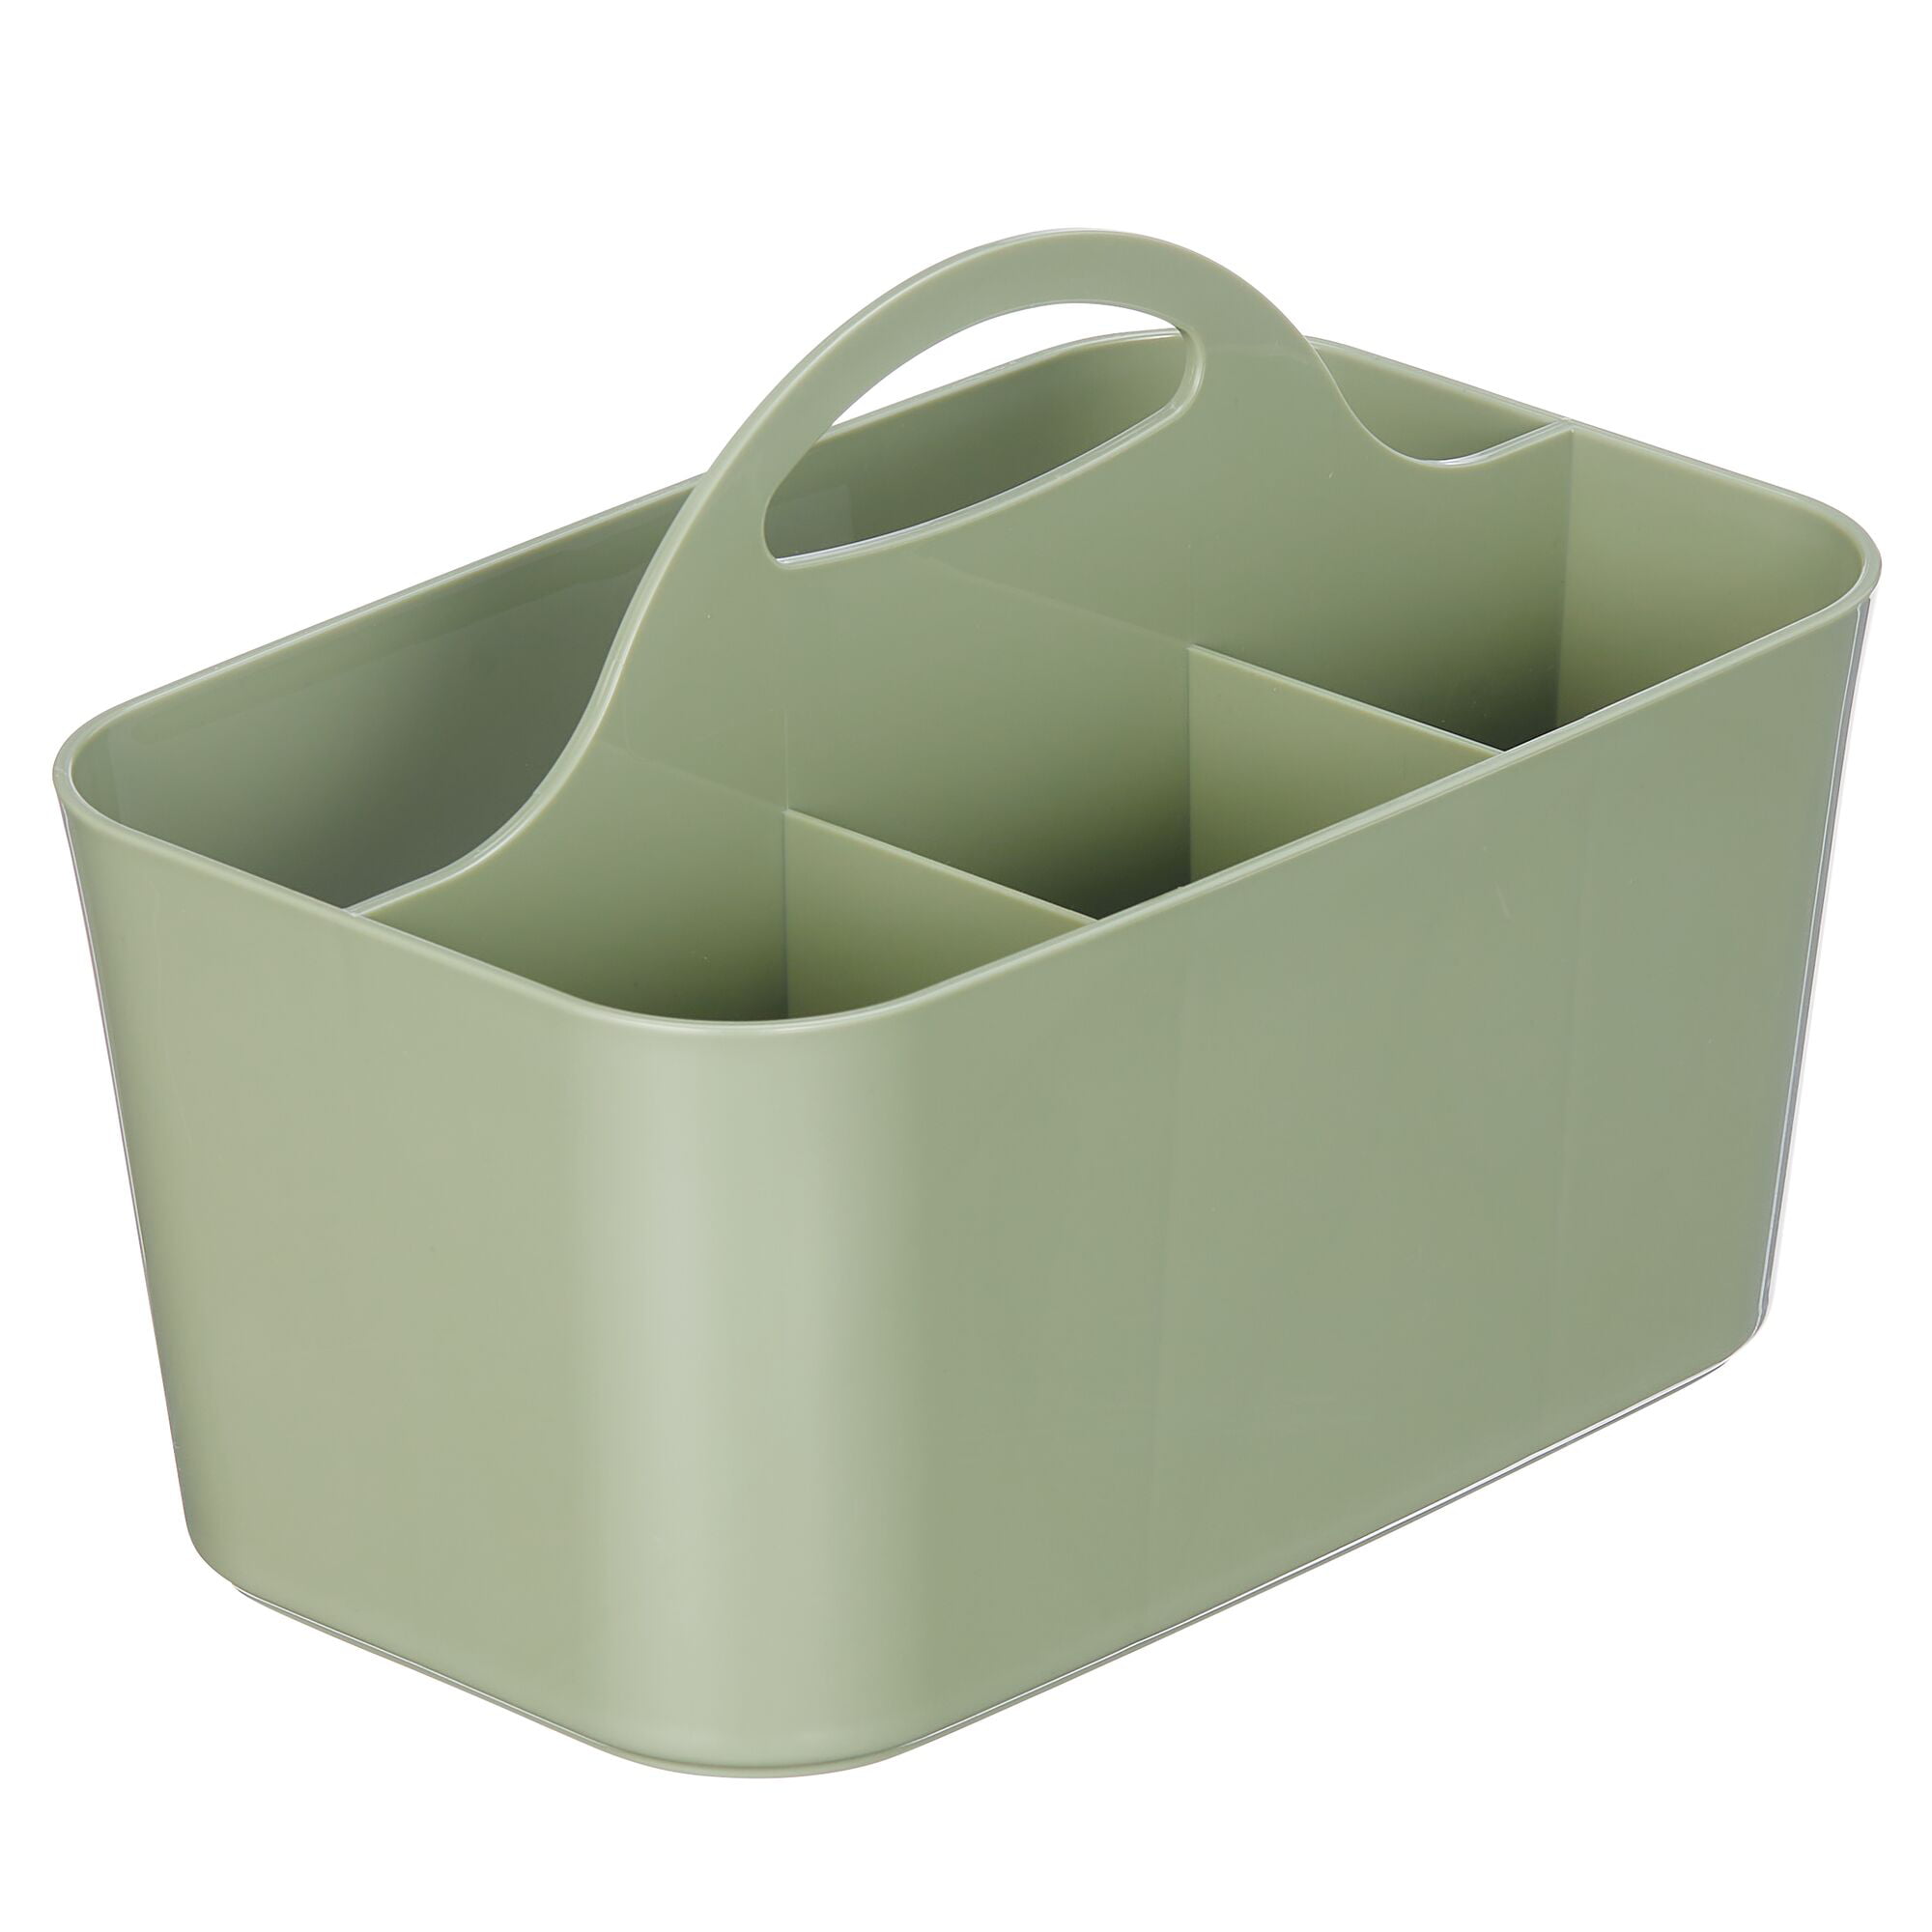 kamuavni Plastic Shower Caddy Basket with One Handle, Shower Caddy